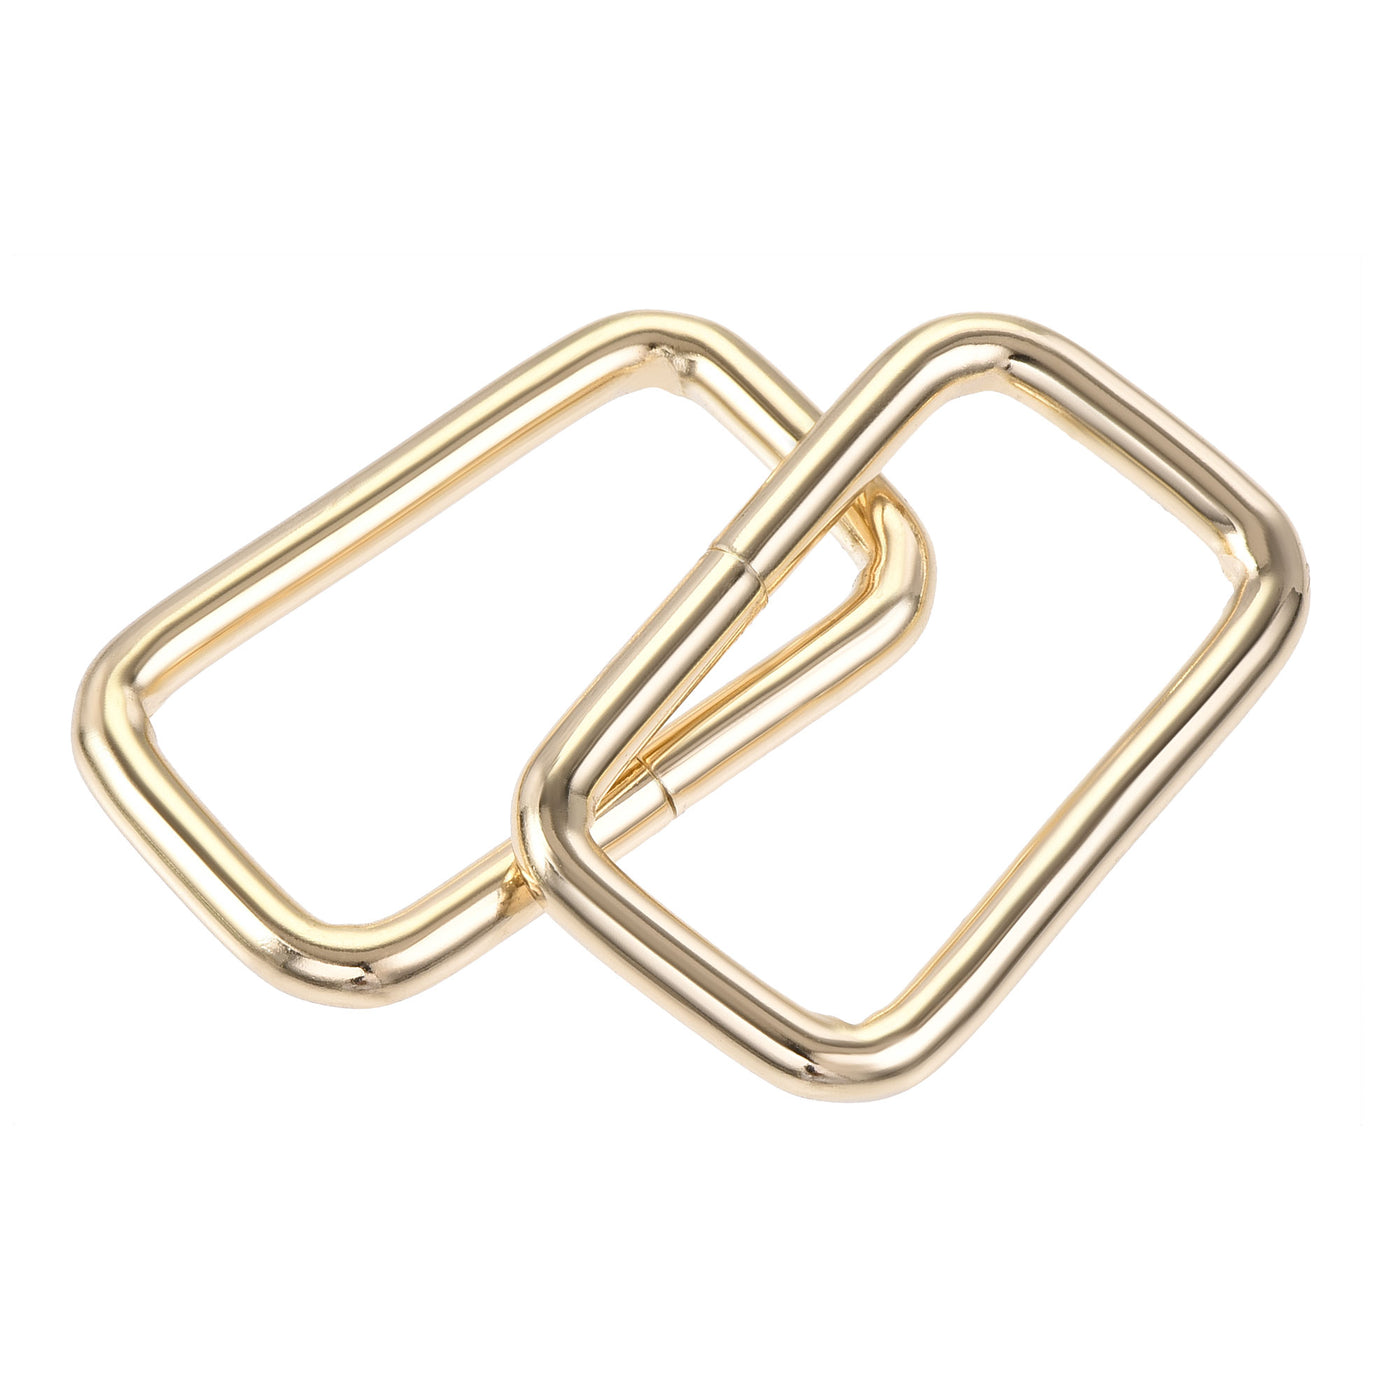 uxcell Uxcell Metal Rectangle Ring Buckles 38x20mm for Bags Belts DIY Gold Tone 10pcs